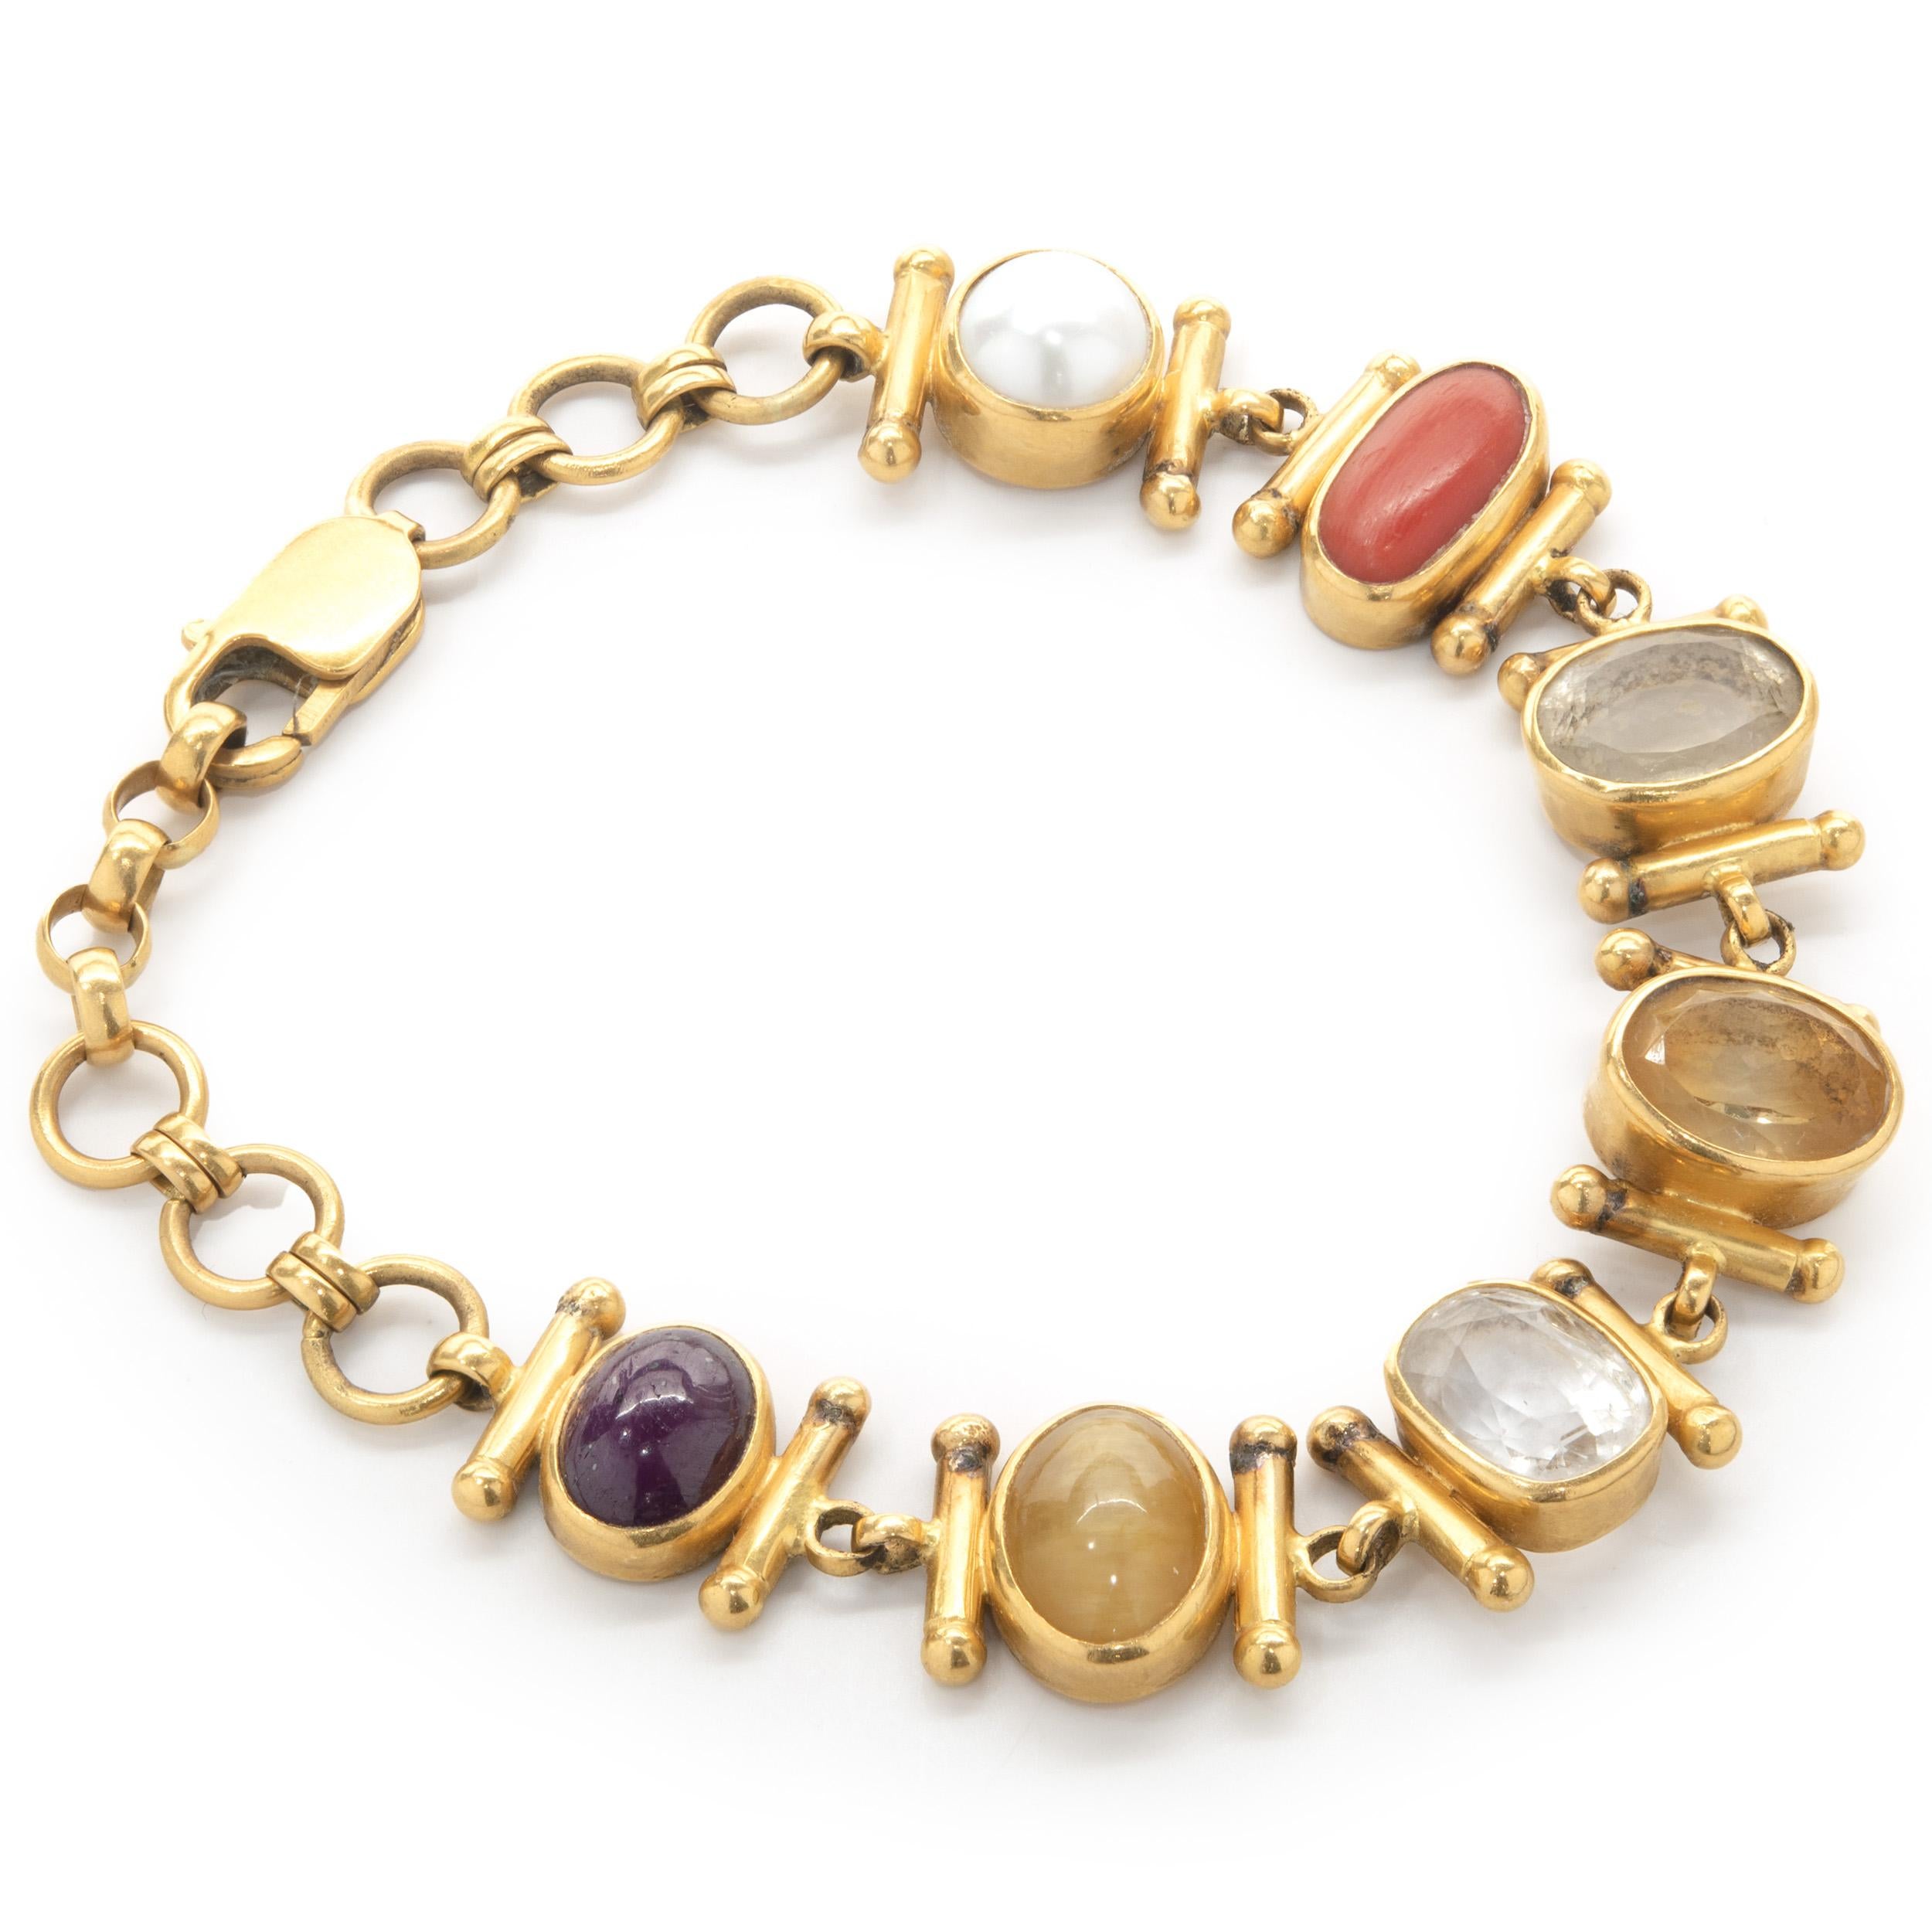 Designer: custom
Material: 21K yellow gold
Weight:  34.20 grams
Dimensions: bracelet will fit an 8.5-inch wrist
